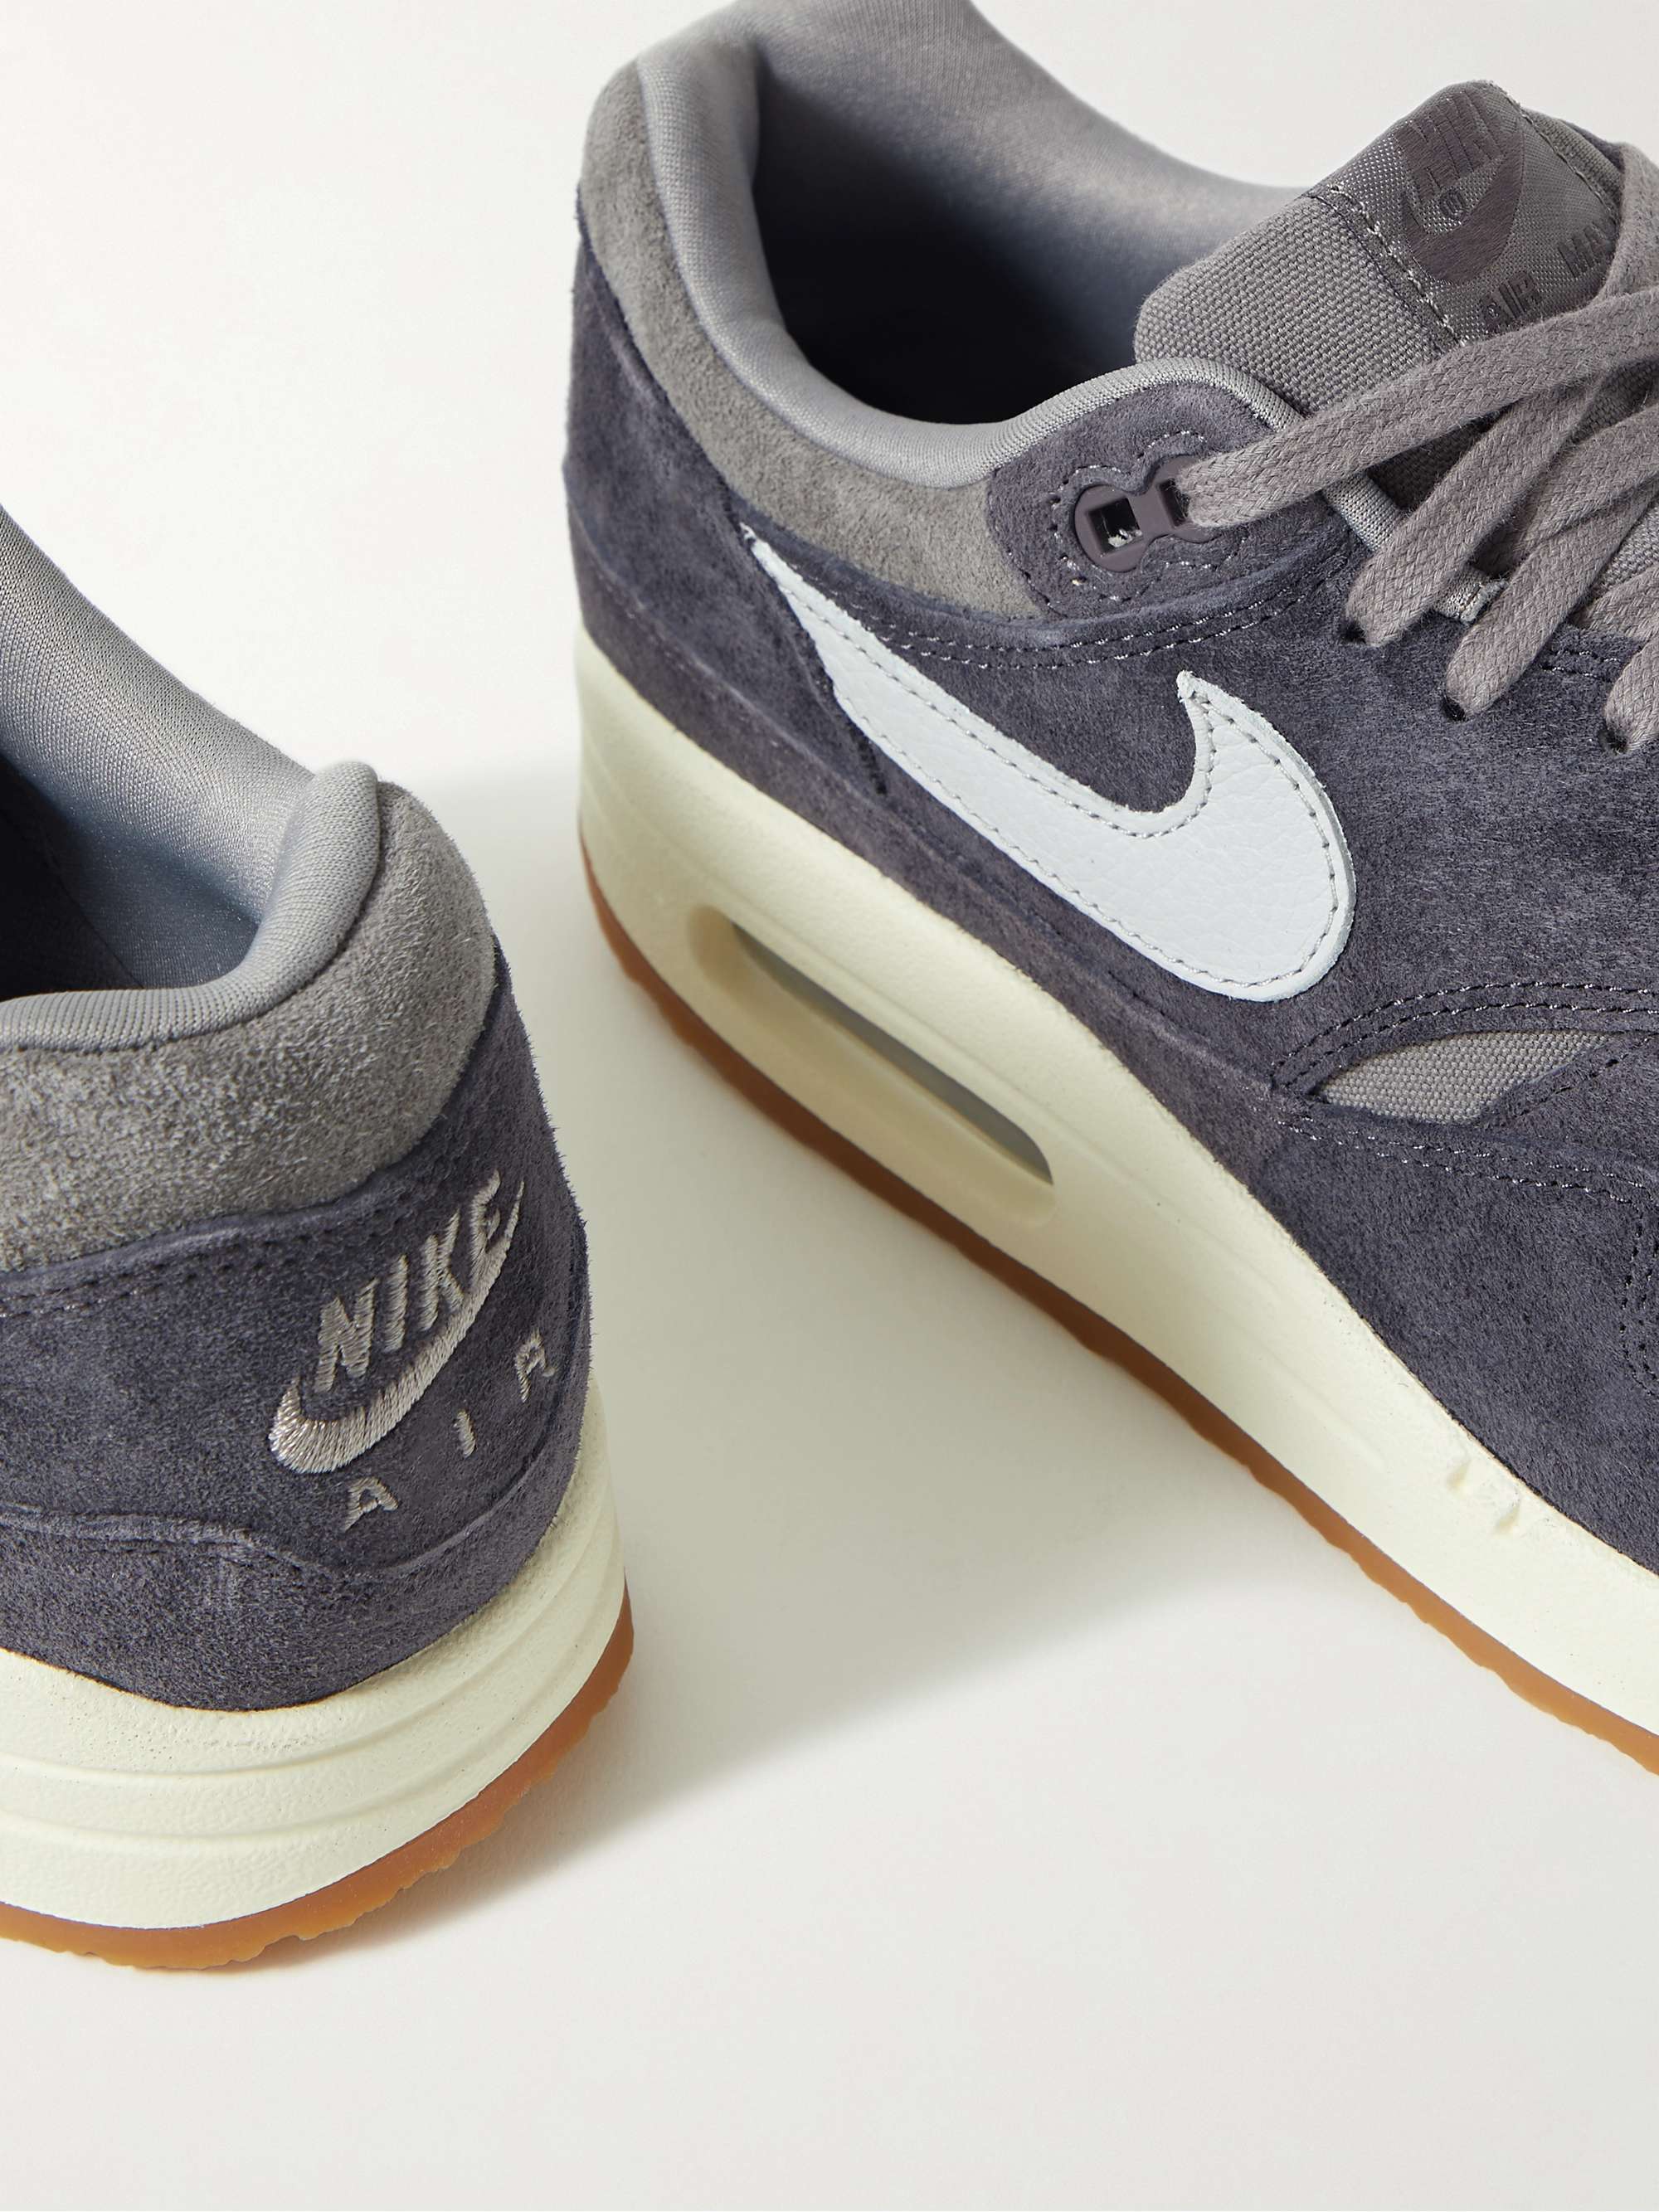 NIKE Air Max 1 Leather-Trimmed Suede Sneakers | MR PORTER